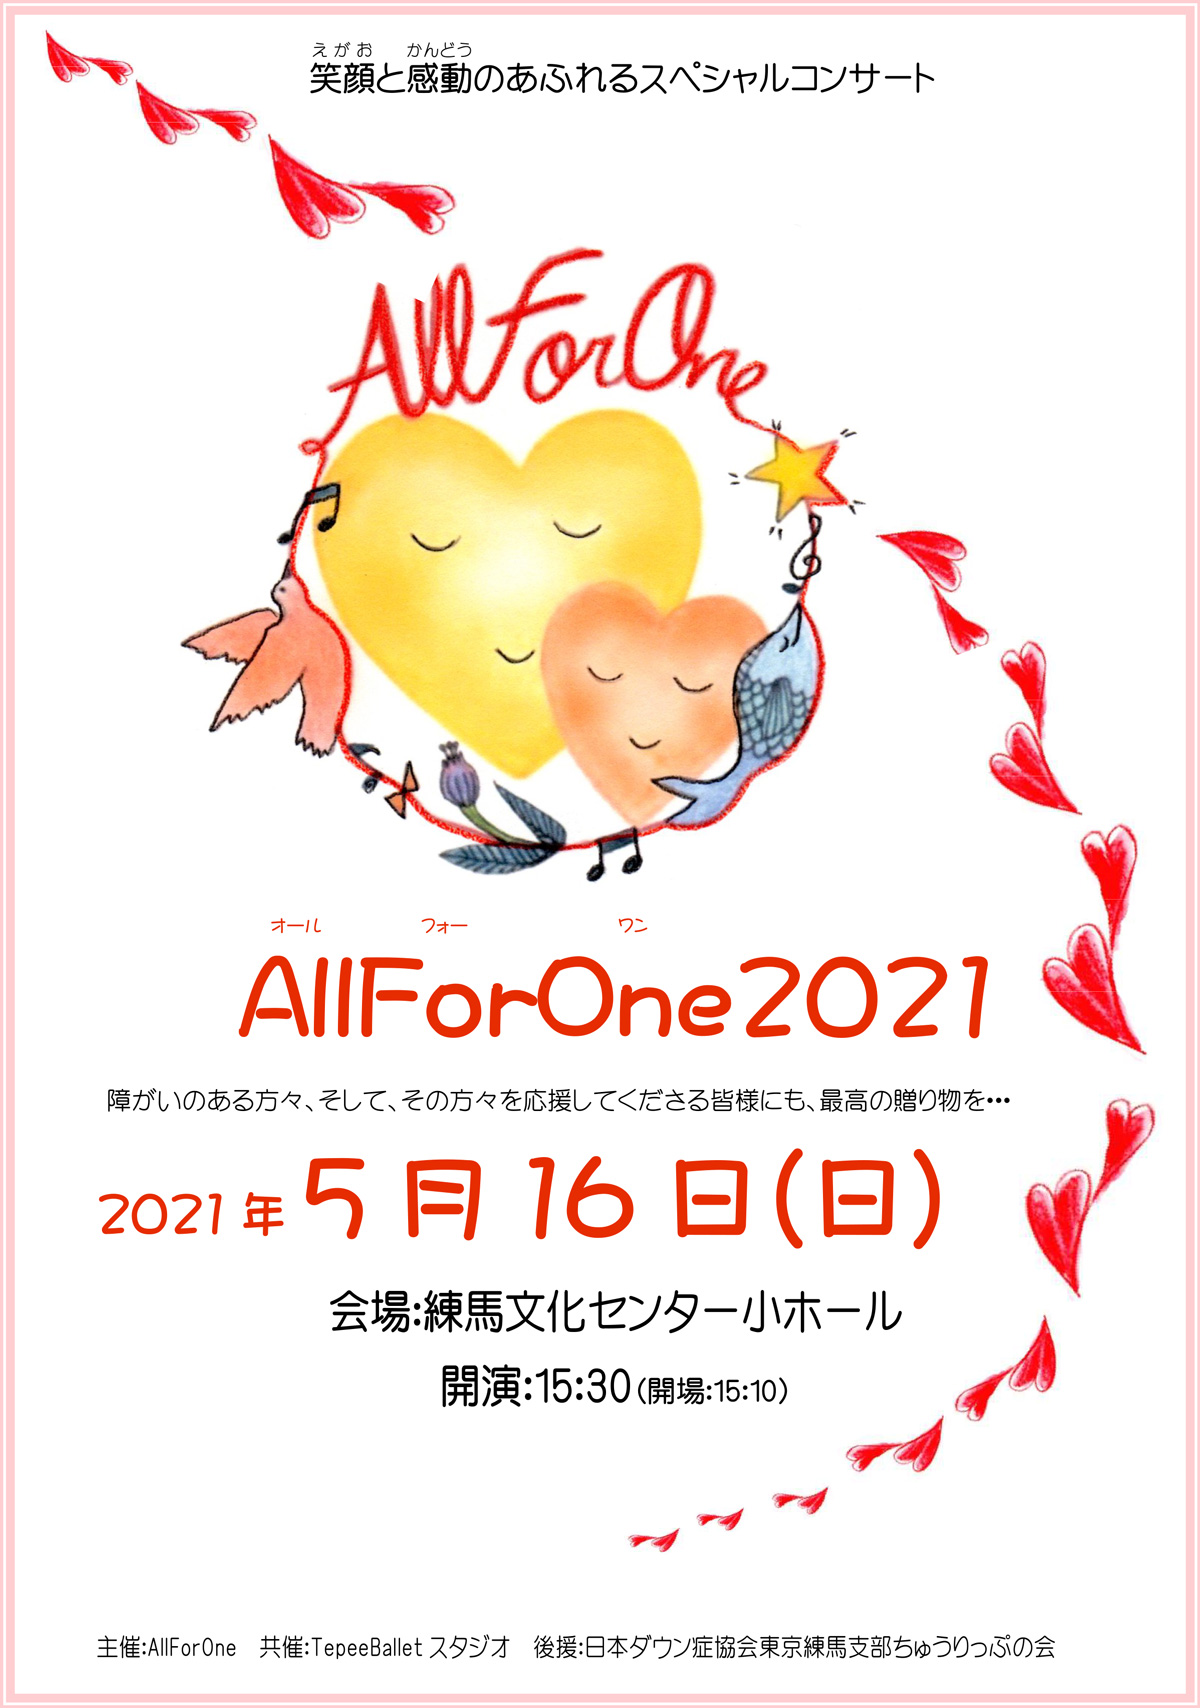 All For One 振替公演決定！のお知らせ